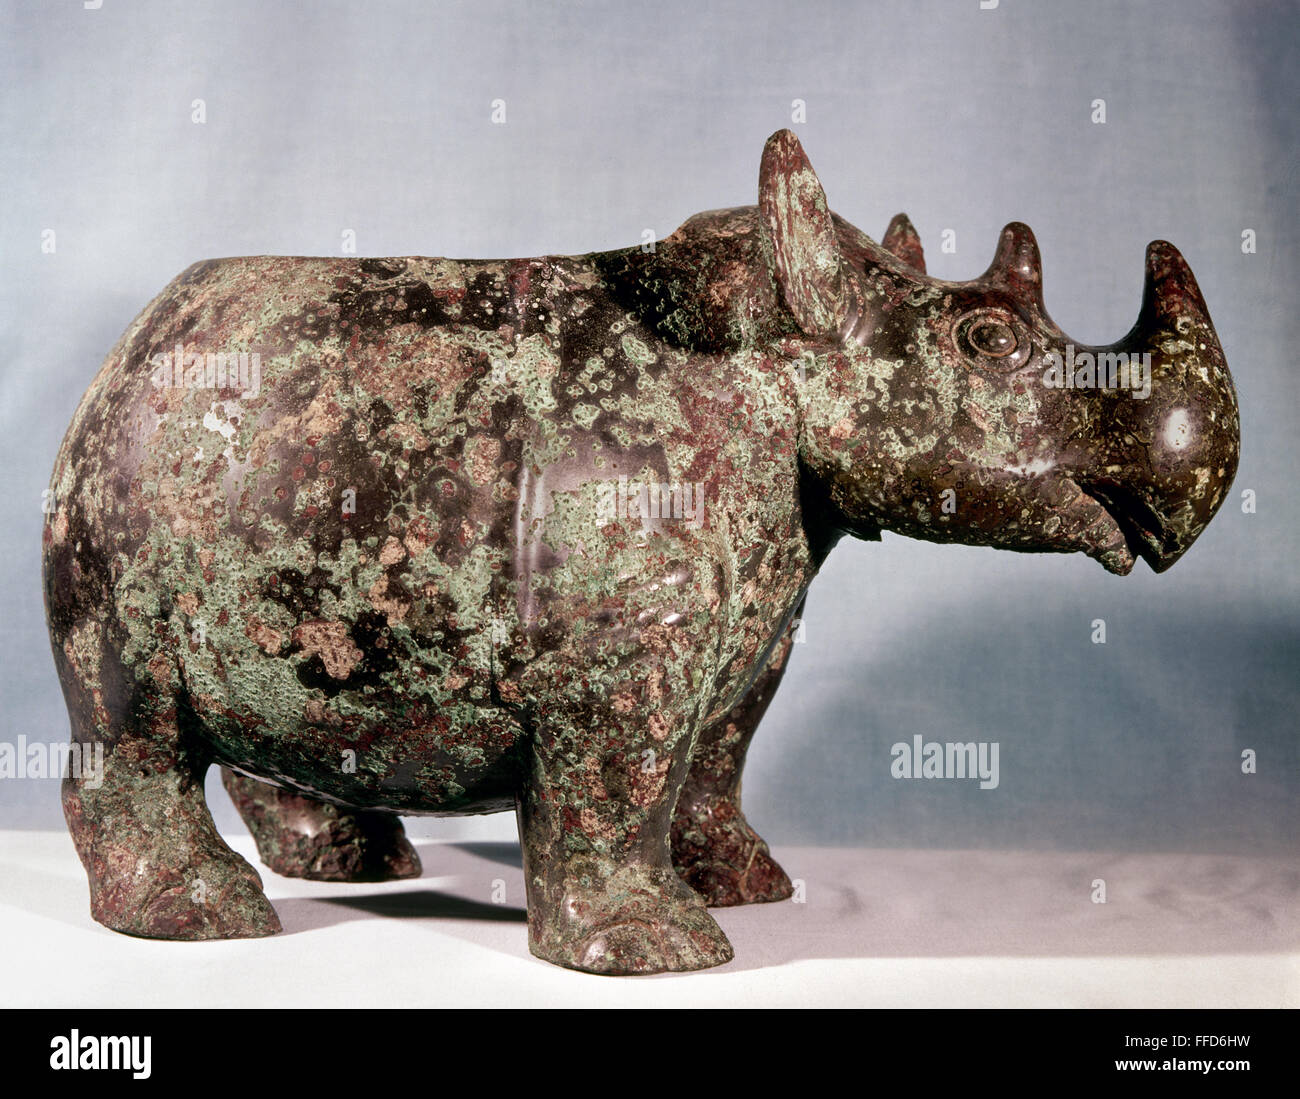 CHINA: BRONZE SCULPTURE. /nBronze 'tsun' wine vessel in the shape of a rhinoceros. Late Shang Dynasty, 11th century B.C. Stock Photo